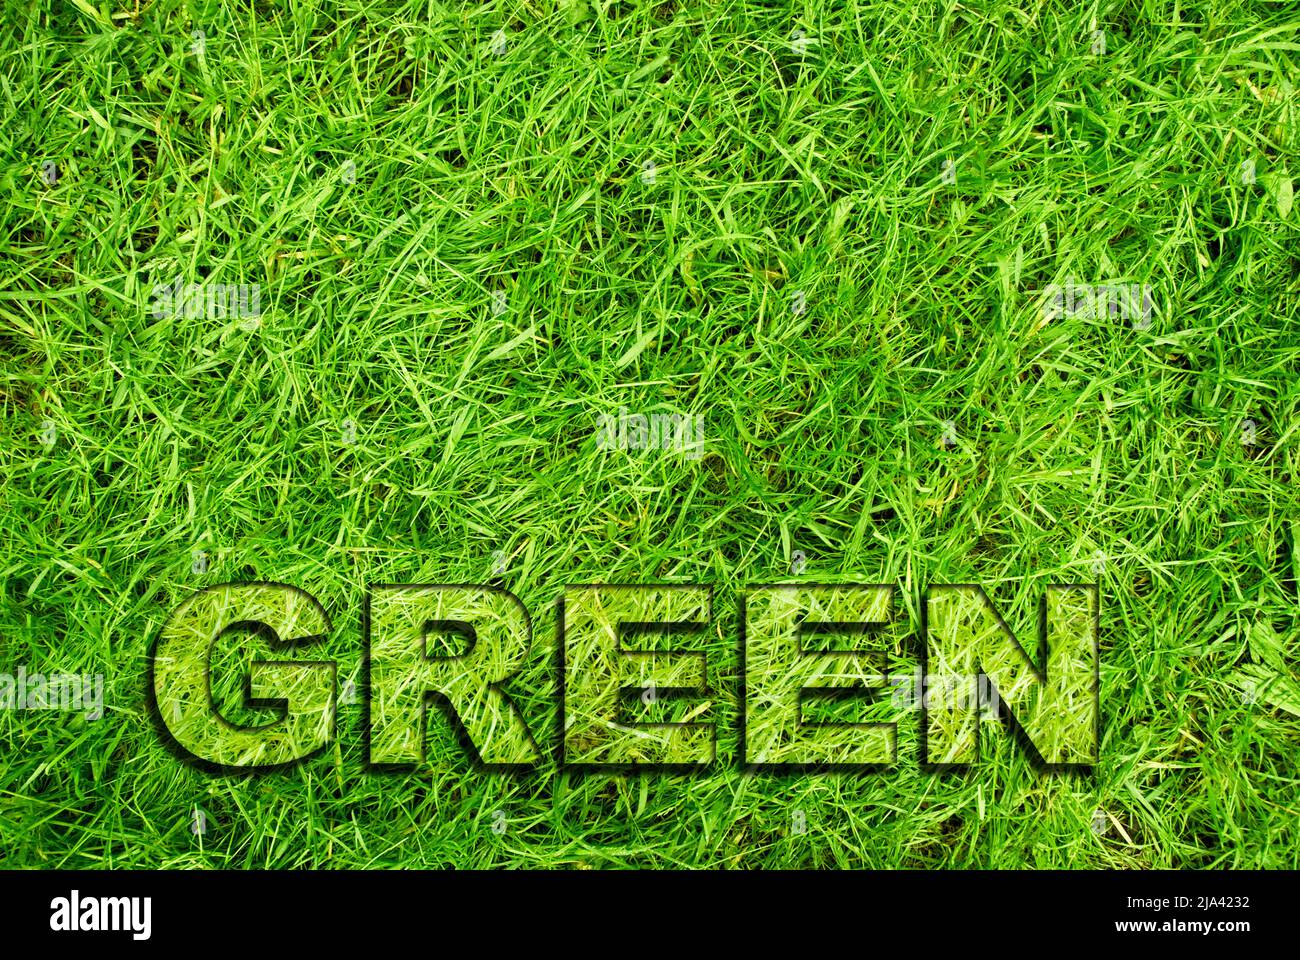 green transition and environment conservation concept Stock Photo